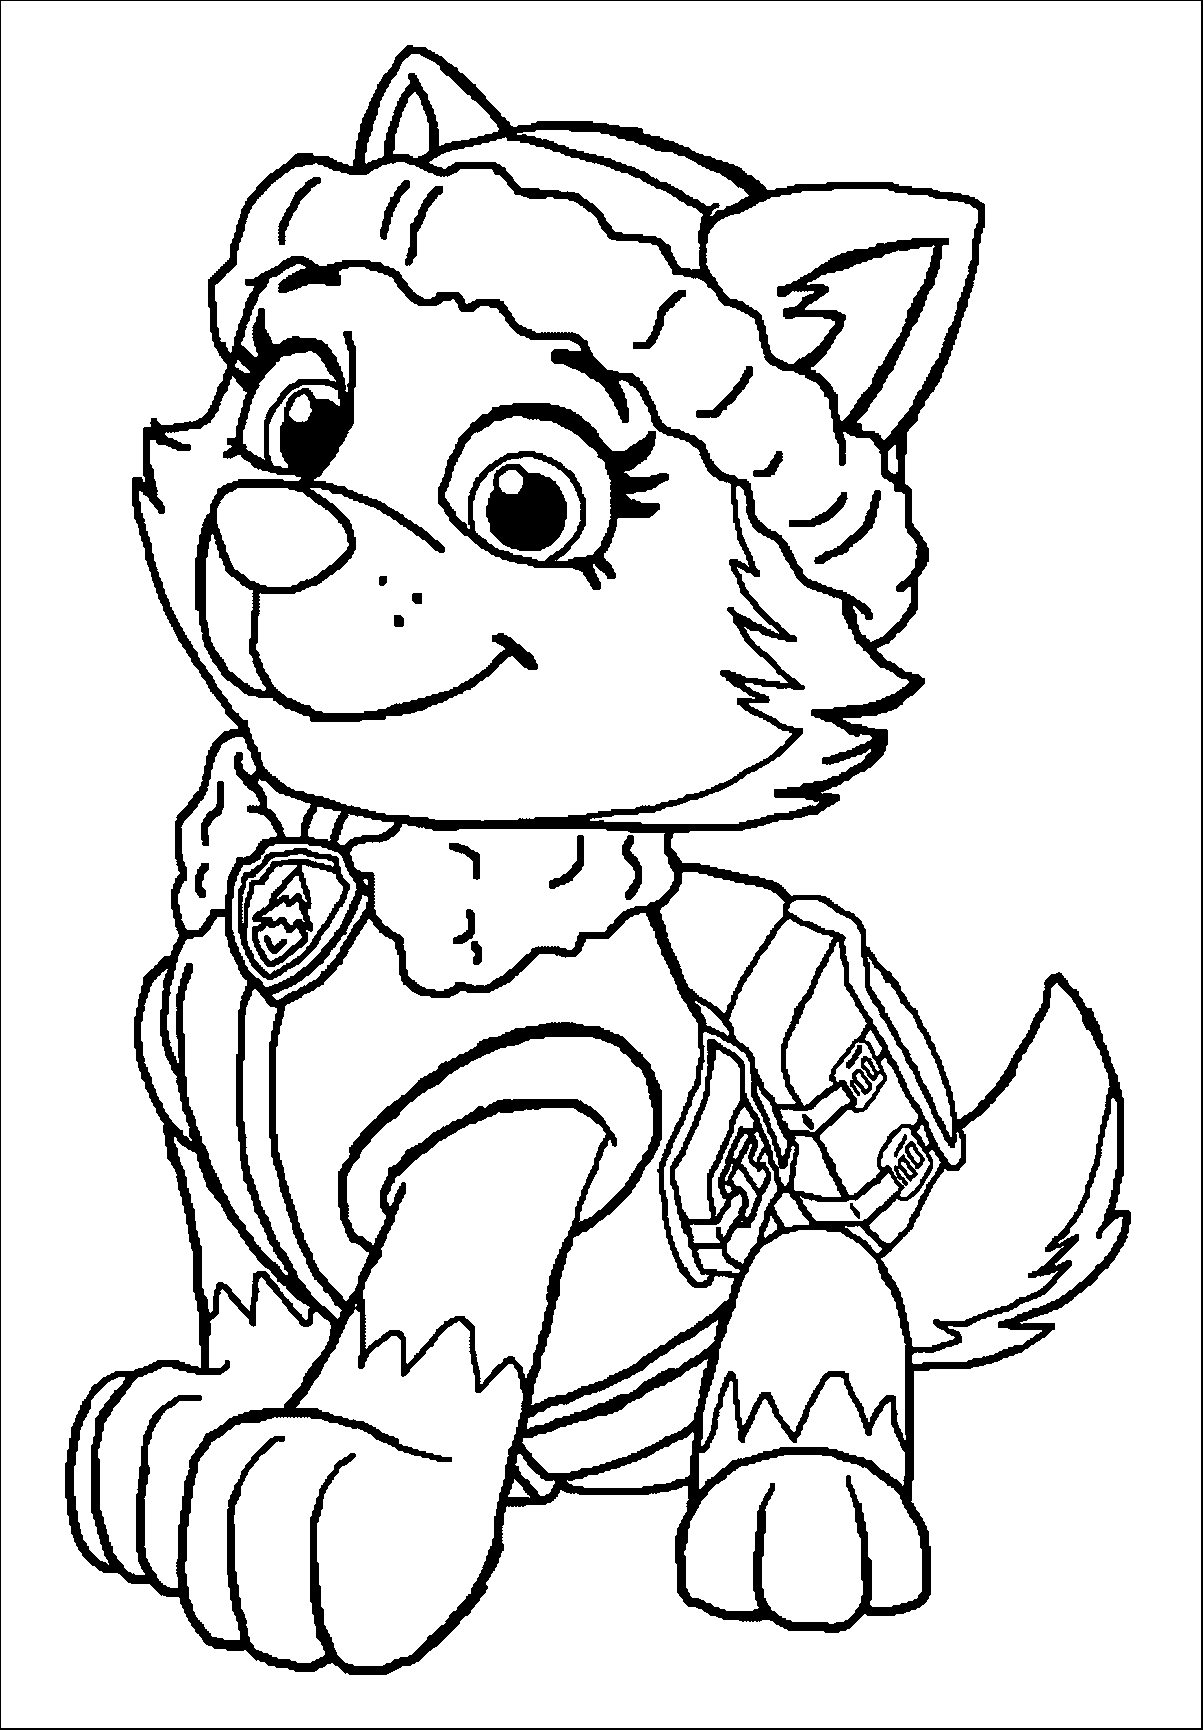 Animal Paw Patrol Coloring Pages Free Printable for Kids